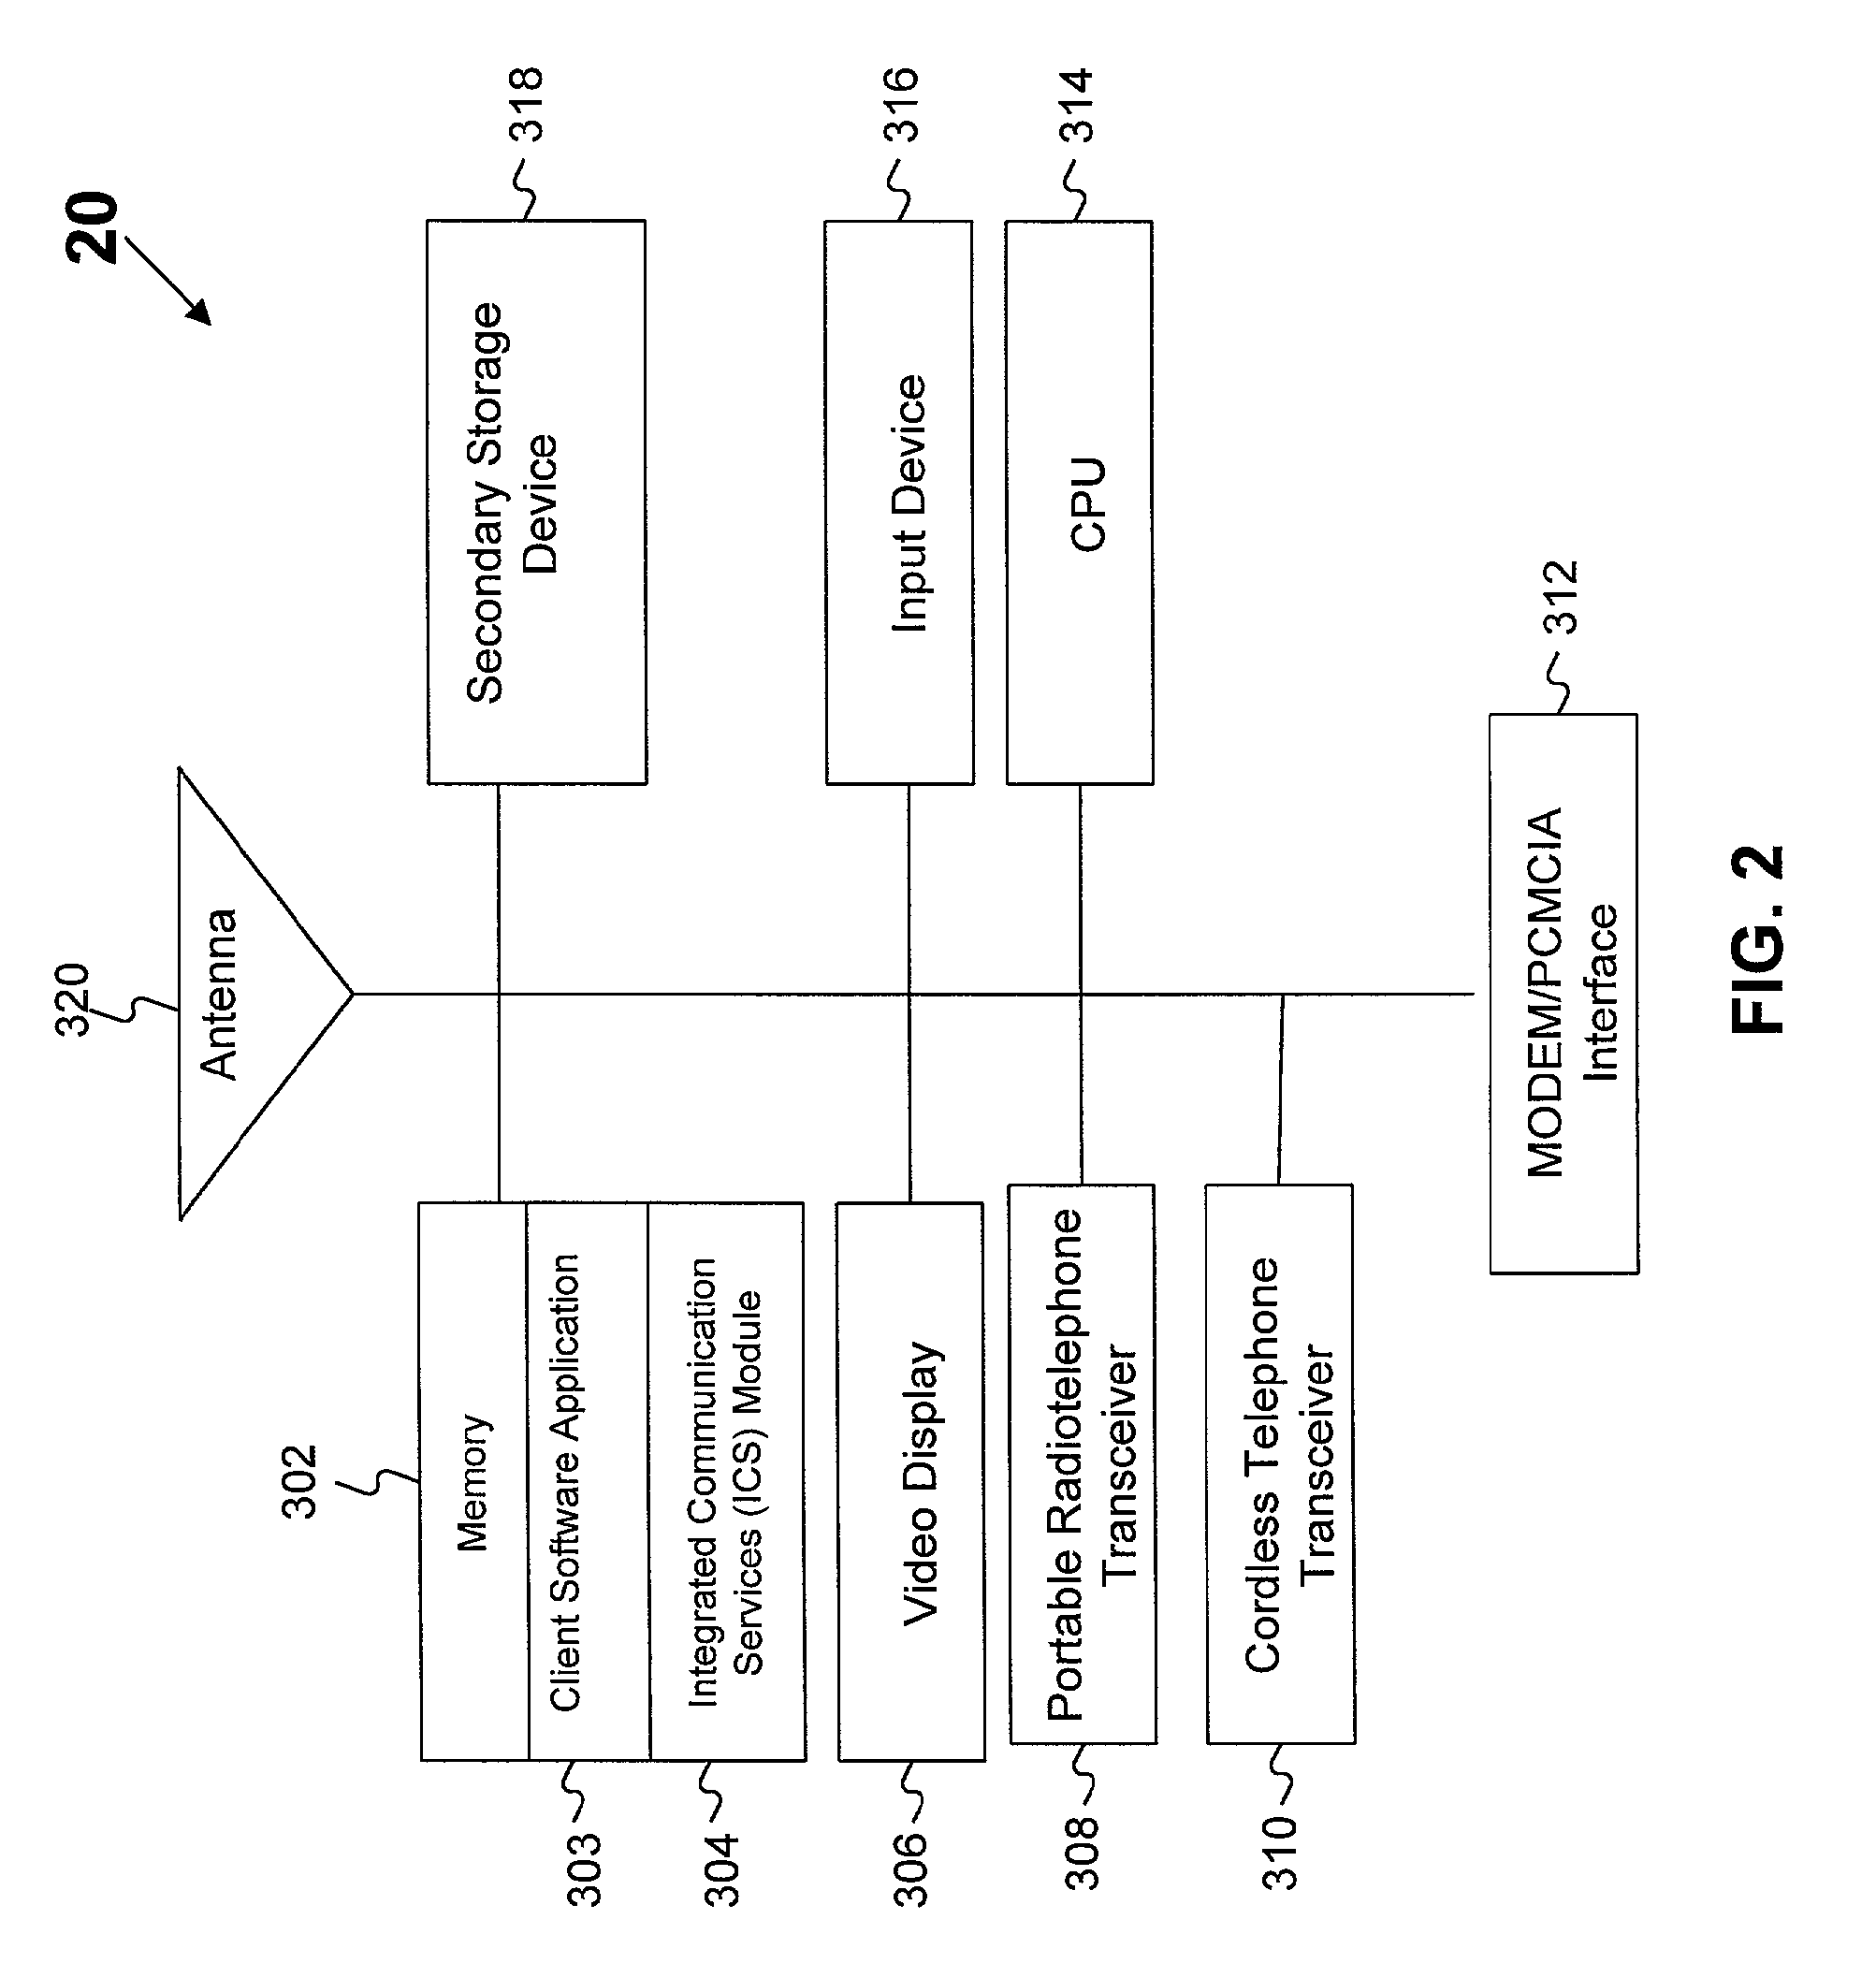 Method and apparatus for integrated communication services provisioning for health care community